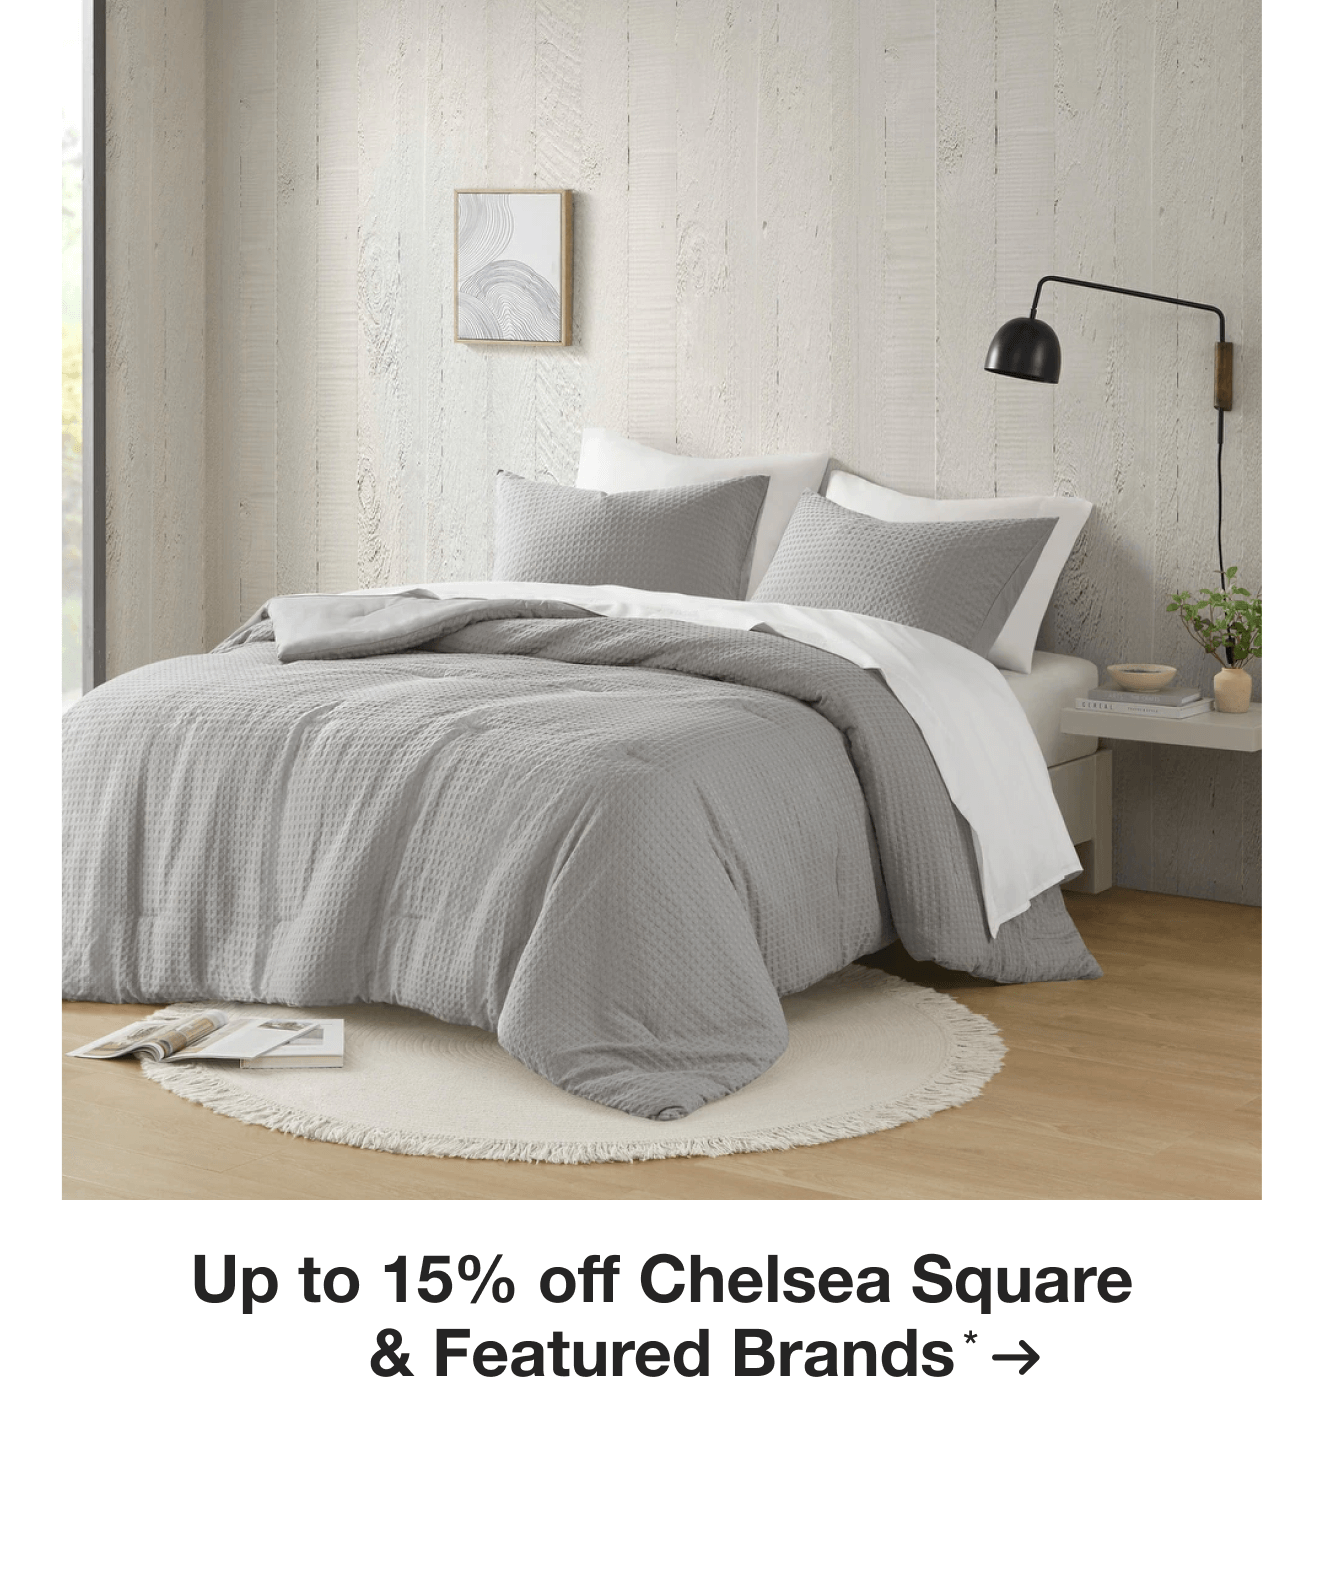 Up to 15% off Chelsea Square & Featured Brands*